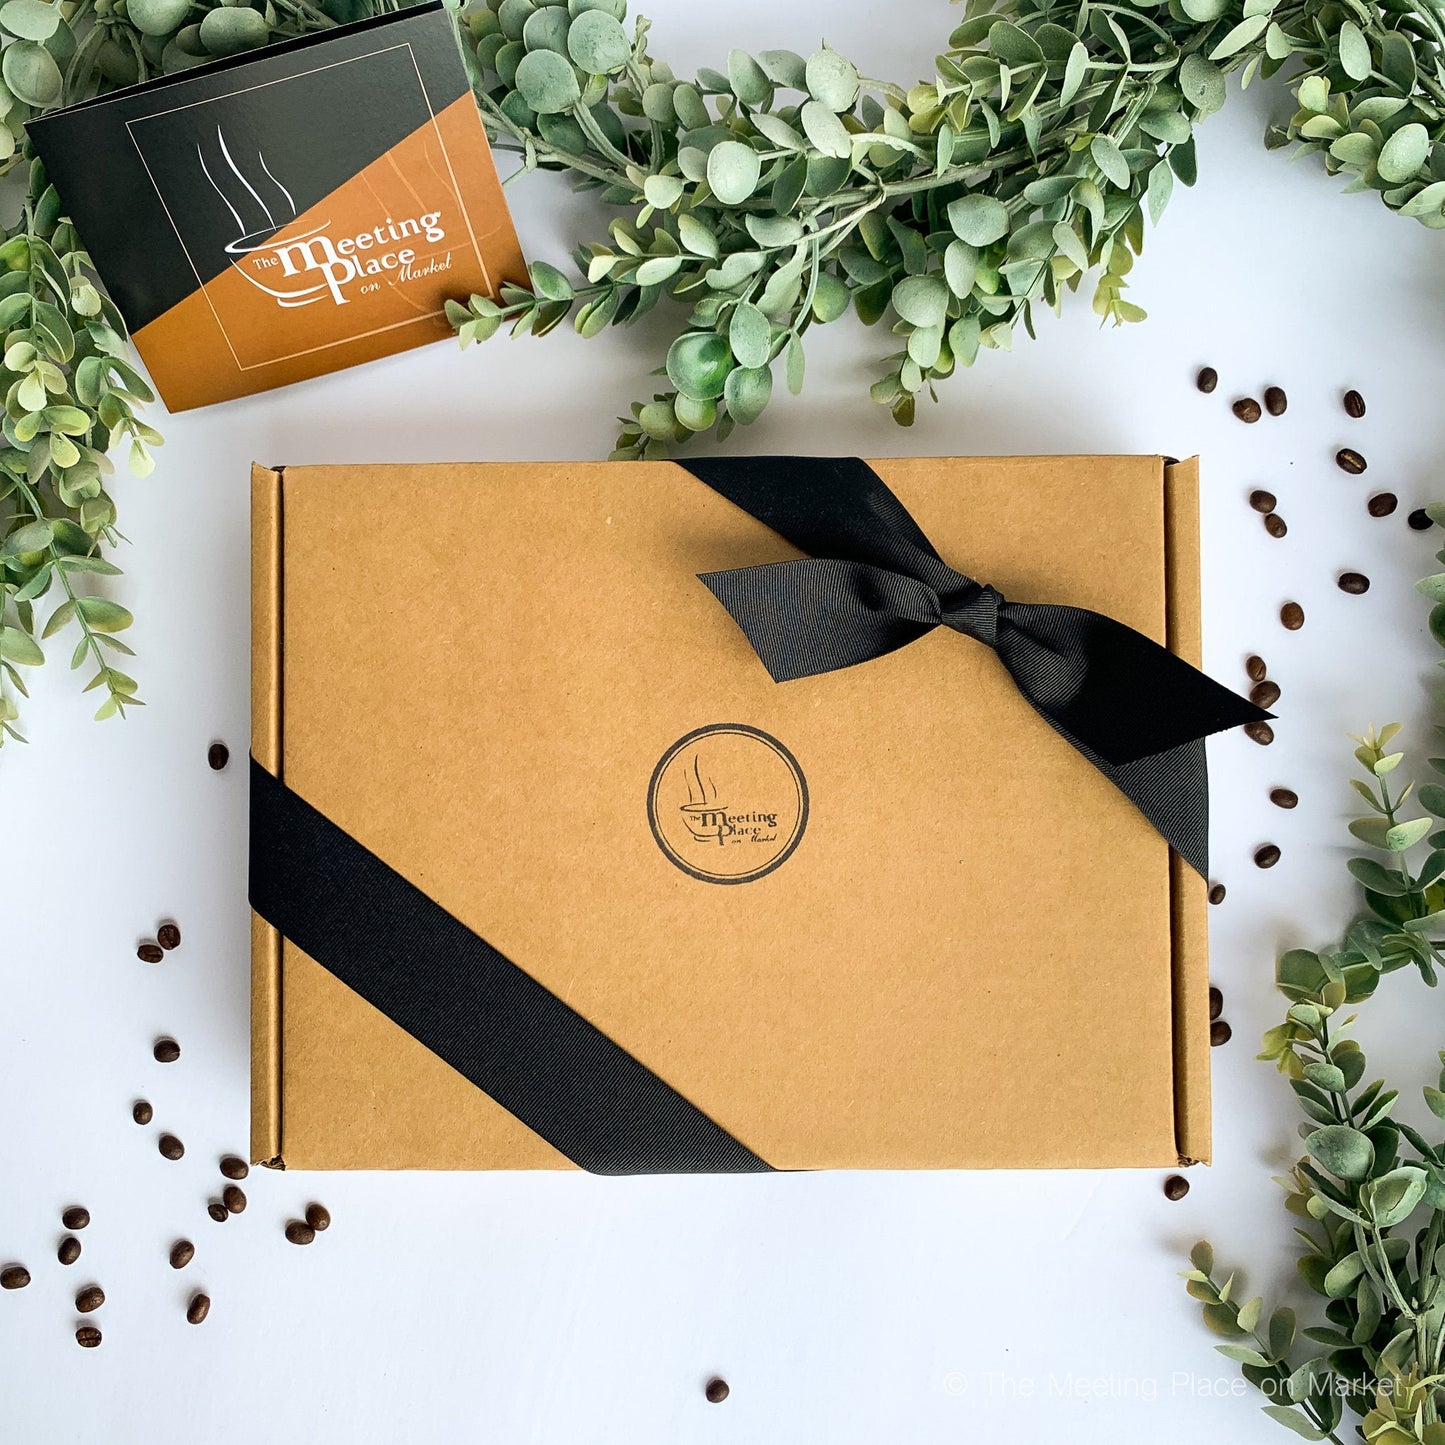 Christmas Coffee Break Gift Box Christmas Gift Basket - The Meeting Place on Market